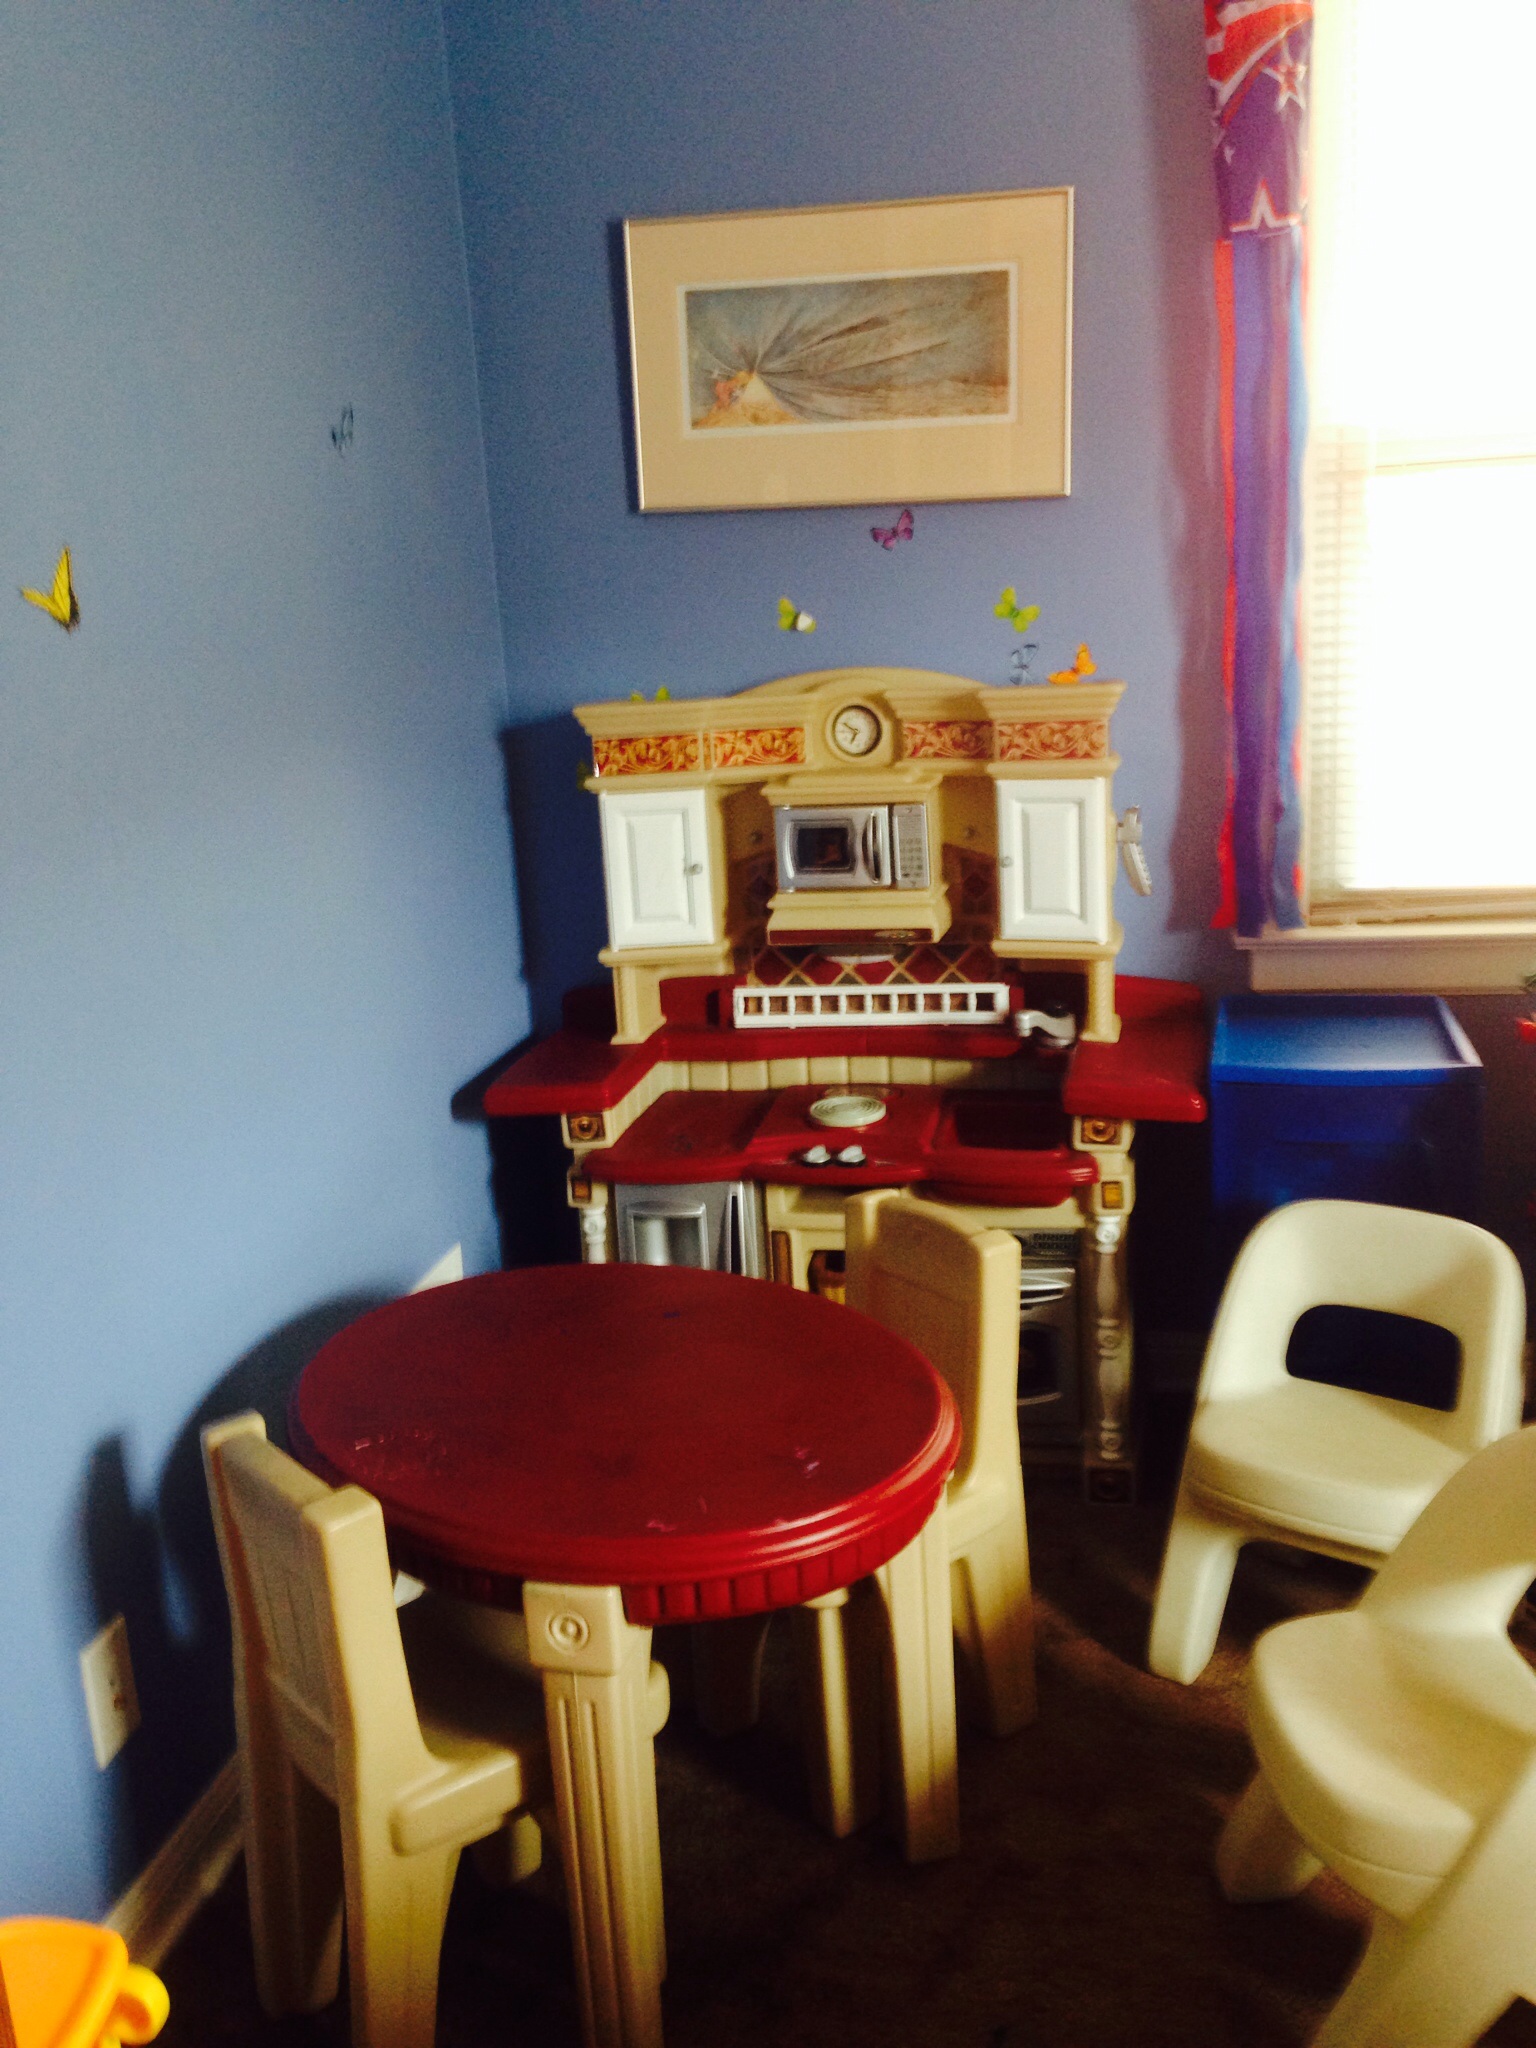 Play kitchen, table, and chairs